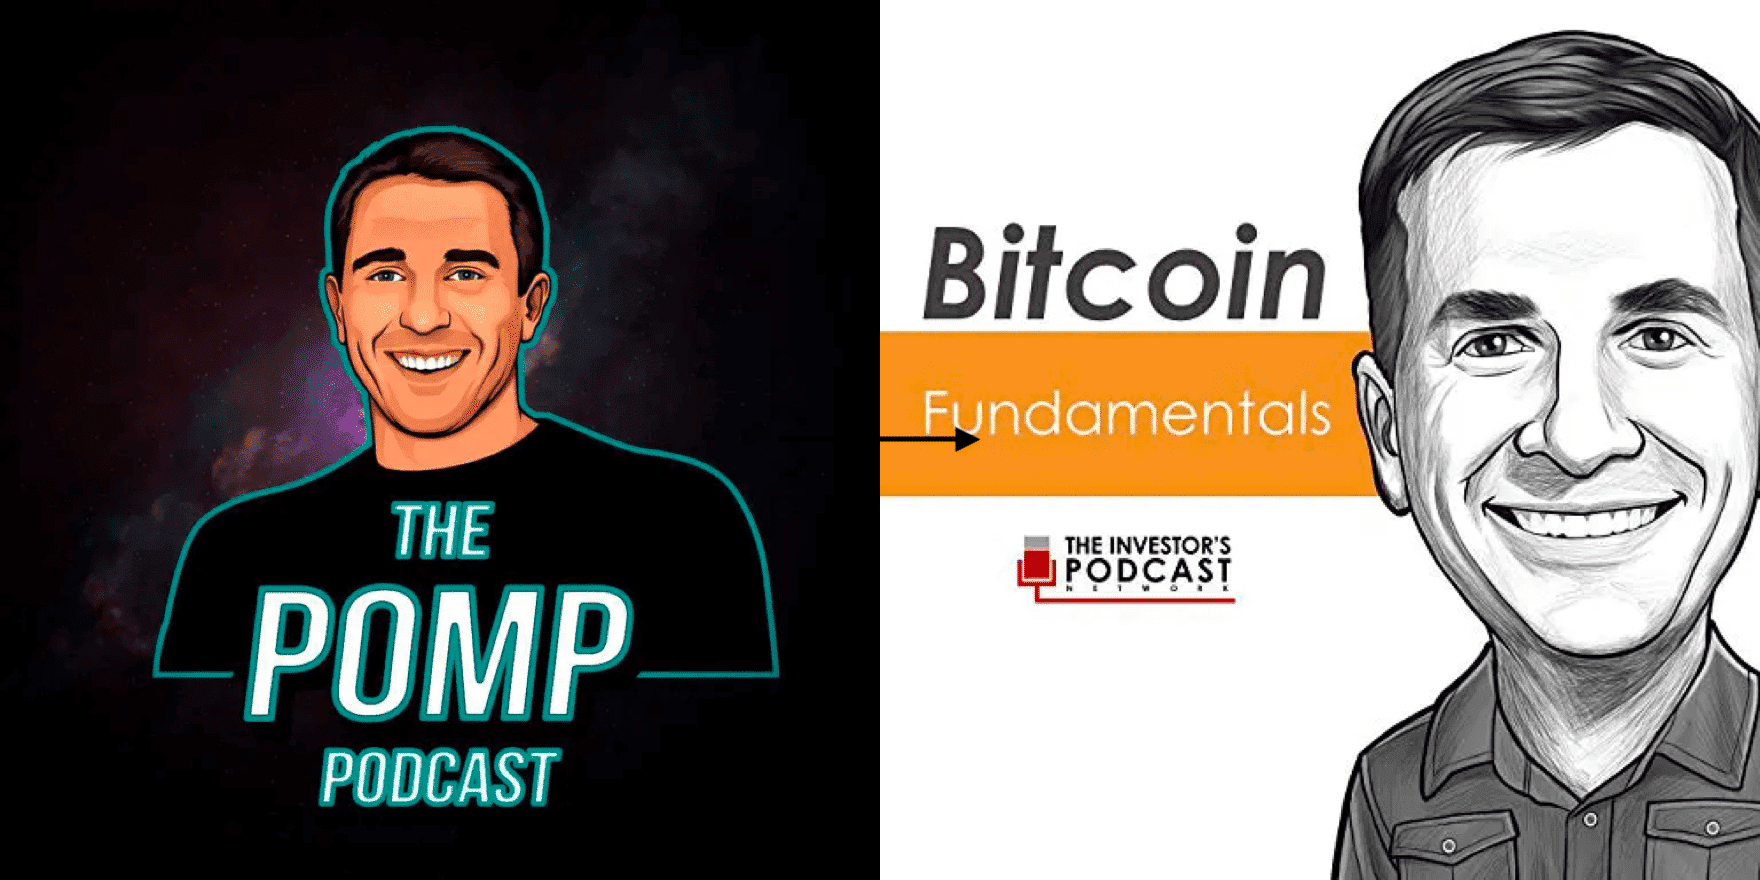 best bitcoin podcast you should listen to when learning about bitcoin and cryptocurrencies